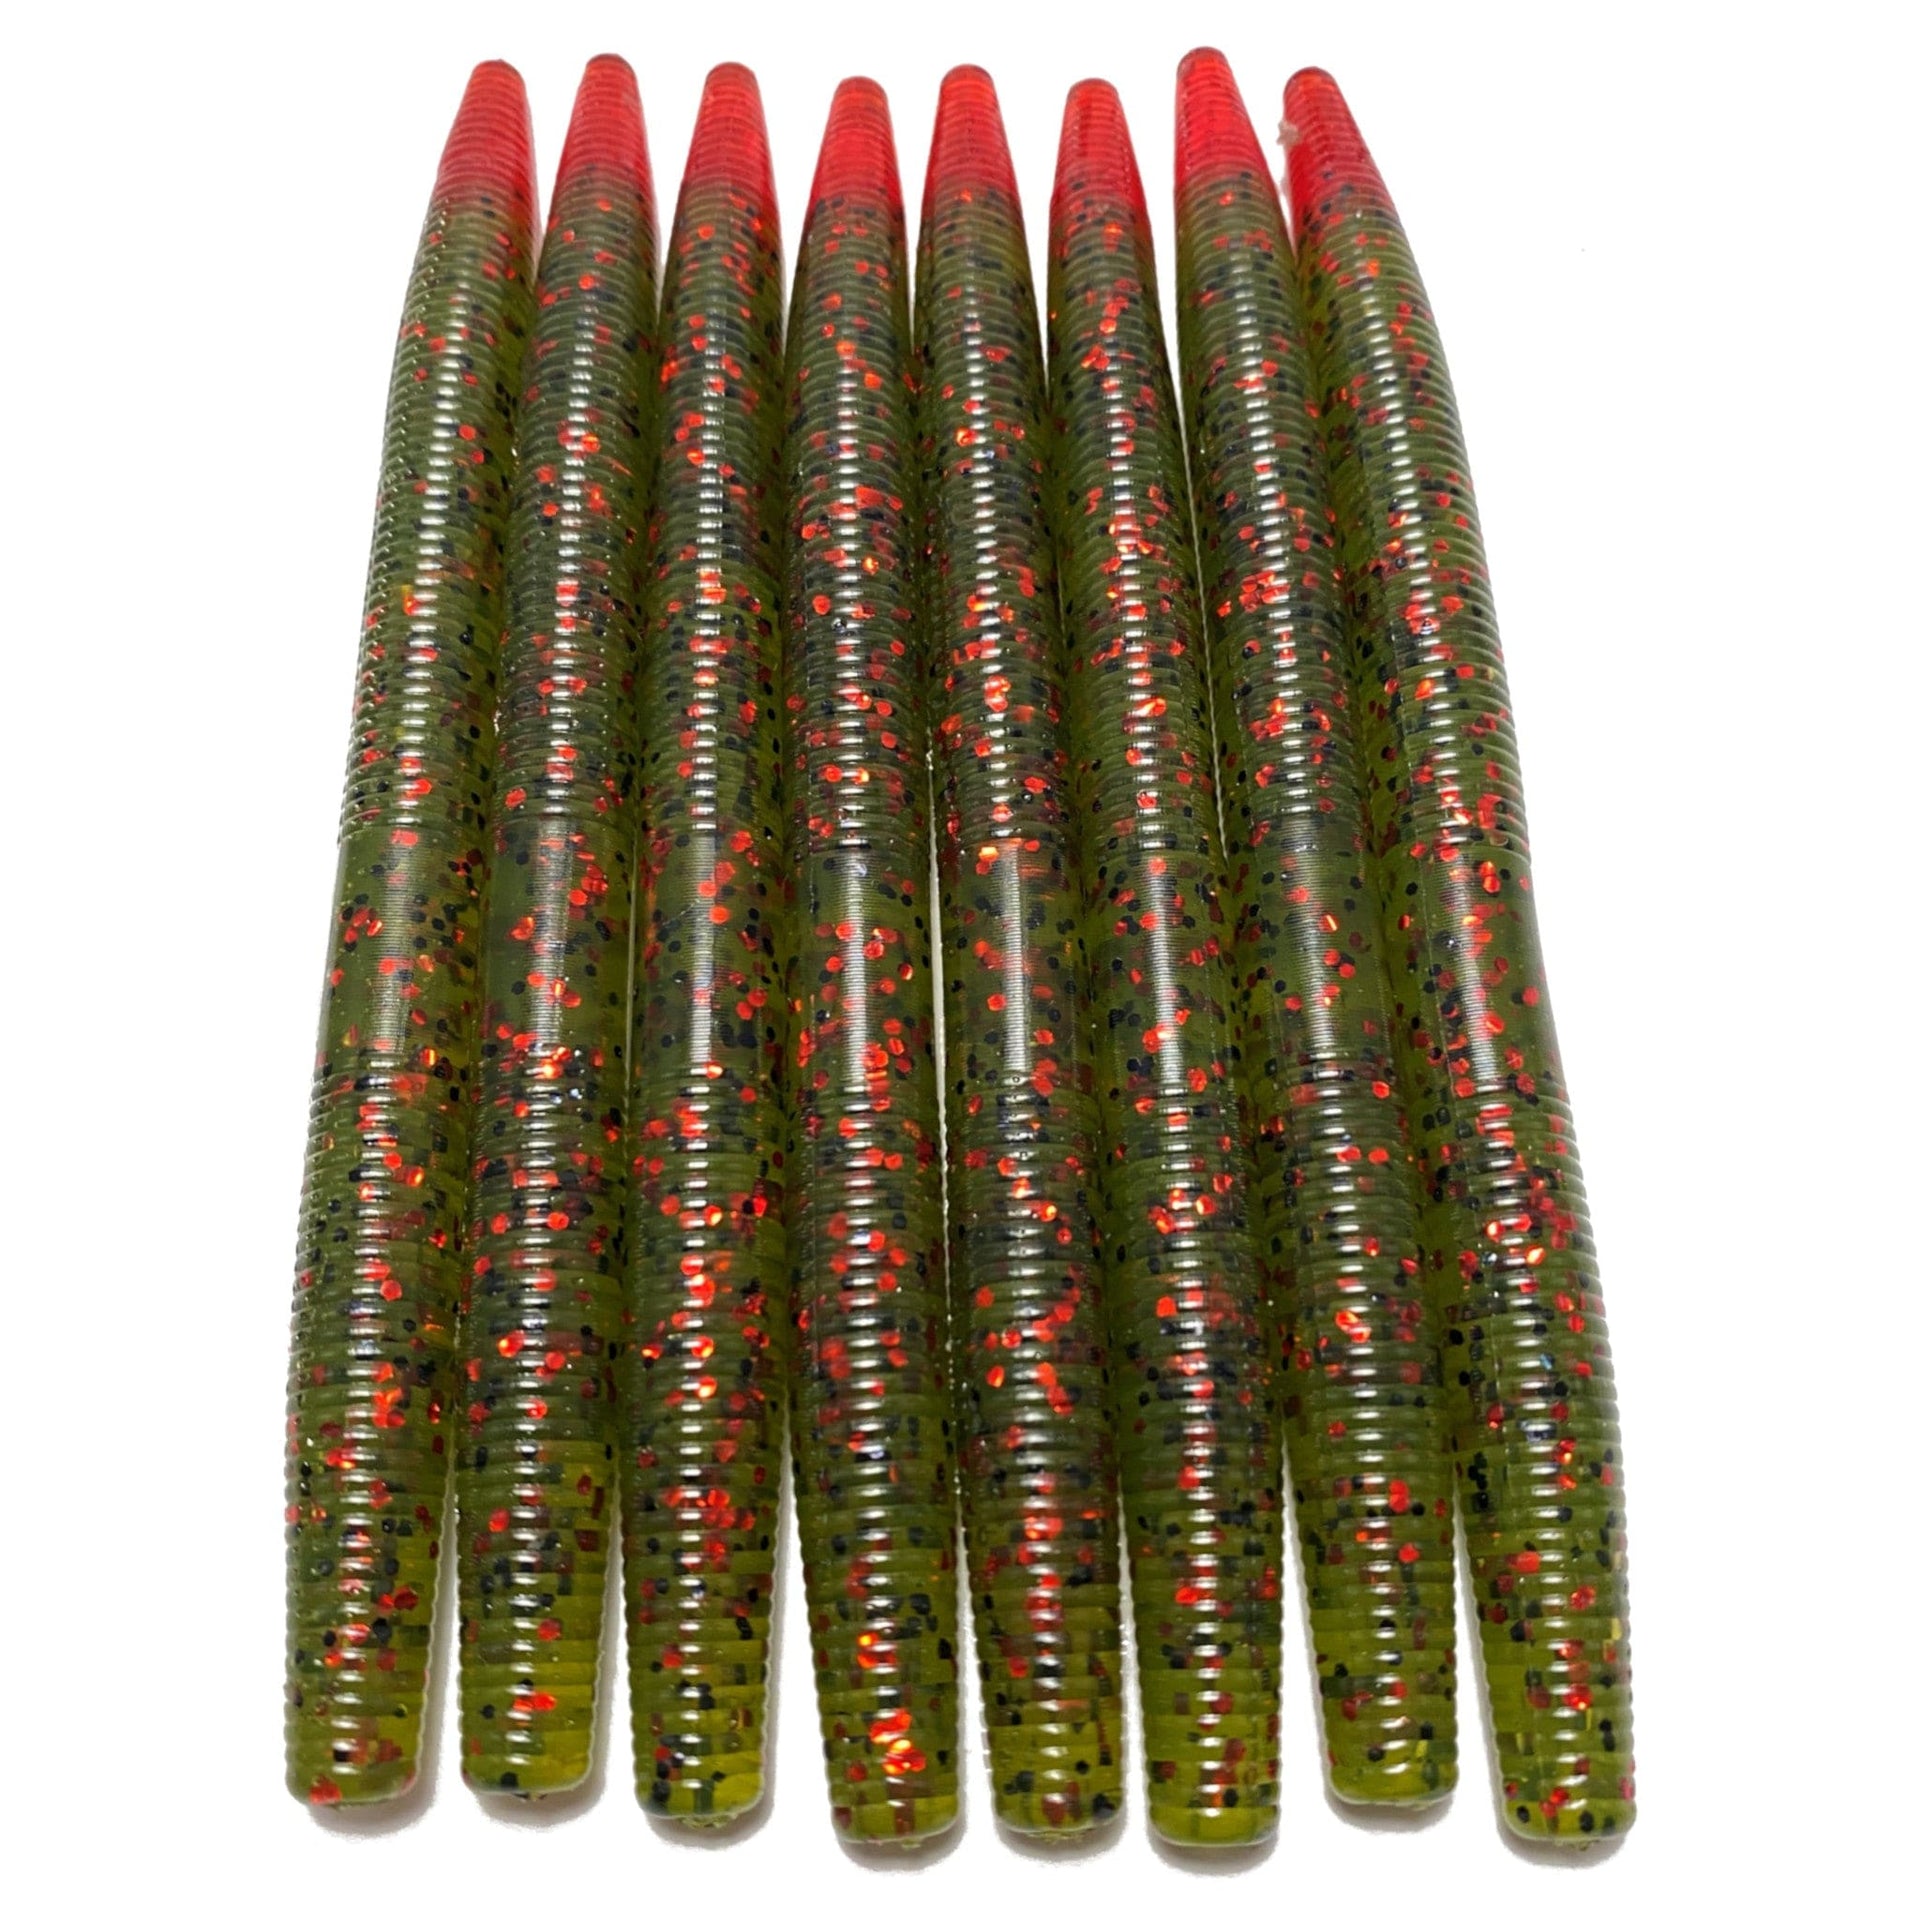 Roboworm - Ned Worm WATERMELON RED/BLUE FLAKE / 3